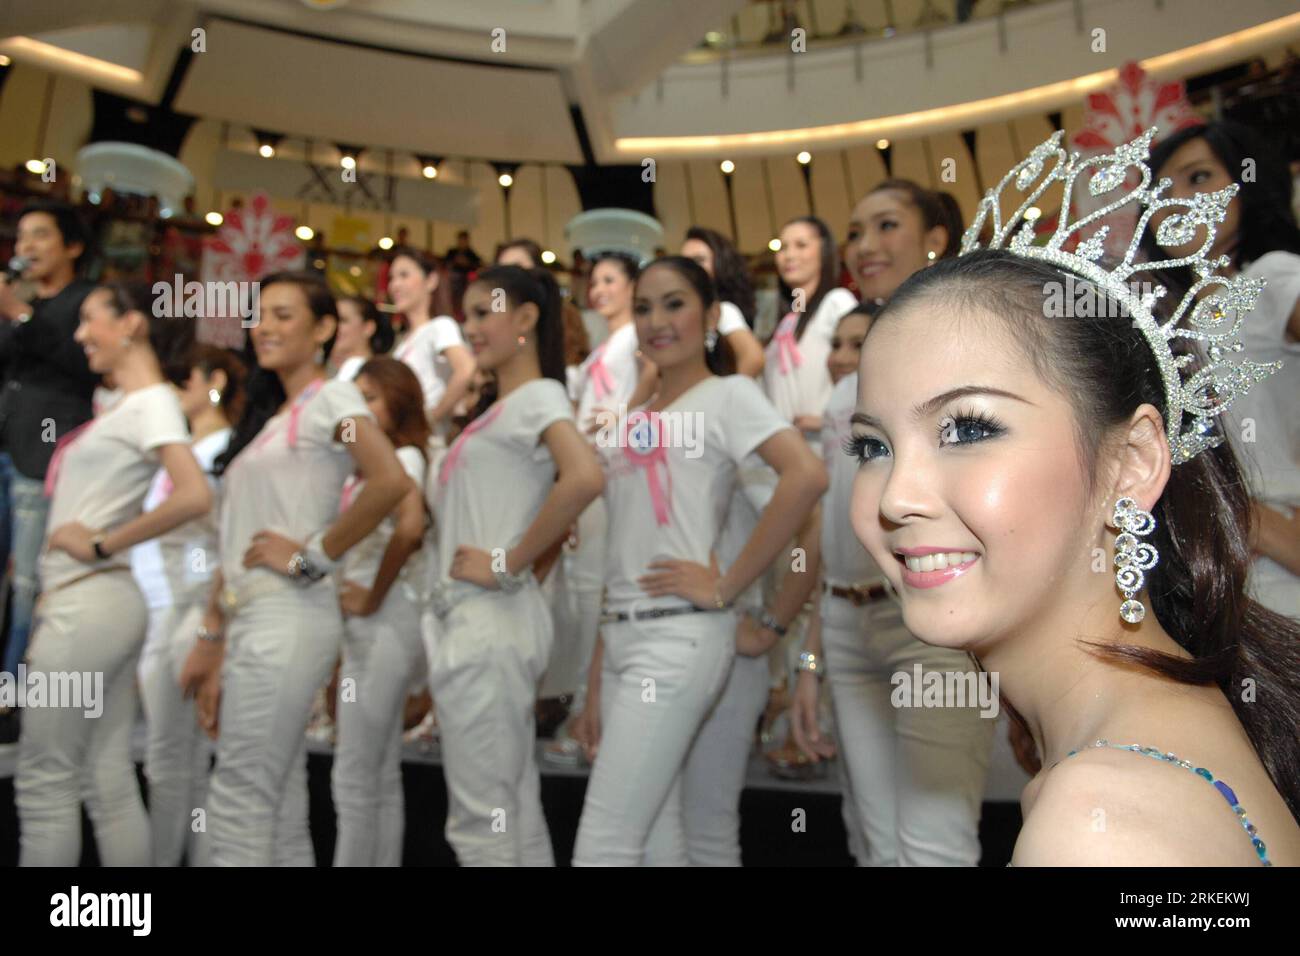 Bildnummer: 55271215  Datum: 18.04.2011  Copyright: imago/Xinhua (110418) -- BANGKOK, April 18, 2011 (Xinhua) -- Beautiful ladyboys pose during the beauty pageant Miss Tiffany s Universe 2011 s in the first elimination round at Central World shopping Mall, Bangkok, capital of Thailand, April 18, 2011. (Xinhua/Rachen Sageamsak) (lmz) THAILAND-BANGKOK-MISS TIFFANY-PAGEANT PUBLICATIONxNOTxINxCHN Gesellschaft Misswahl Schönheitswettbewerb xo0x kbdig xub 2011 quer     Bildnummer 55271215 Date 18 04 2011 Copyright Imago XINHUA  Bangkok April 18 2011 XINHUA Beautiful Lady Boys Pose during The Beauty Stock Photo